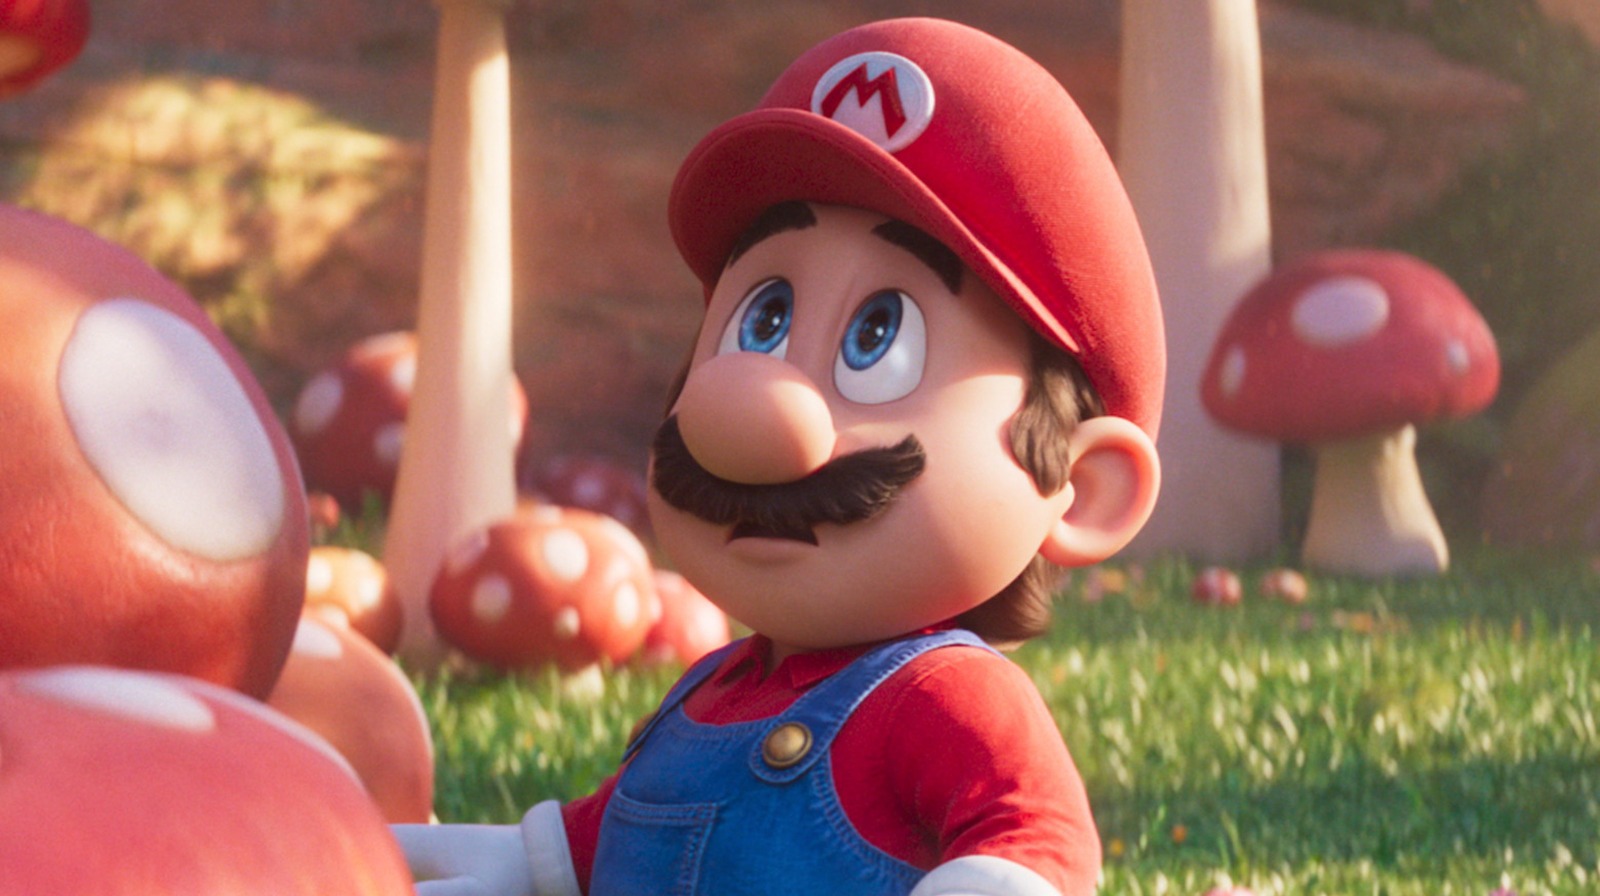 Charlie Day Steals The Show As Luigi In The Super Mario Bros